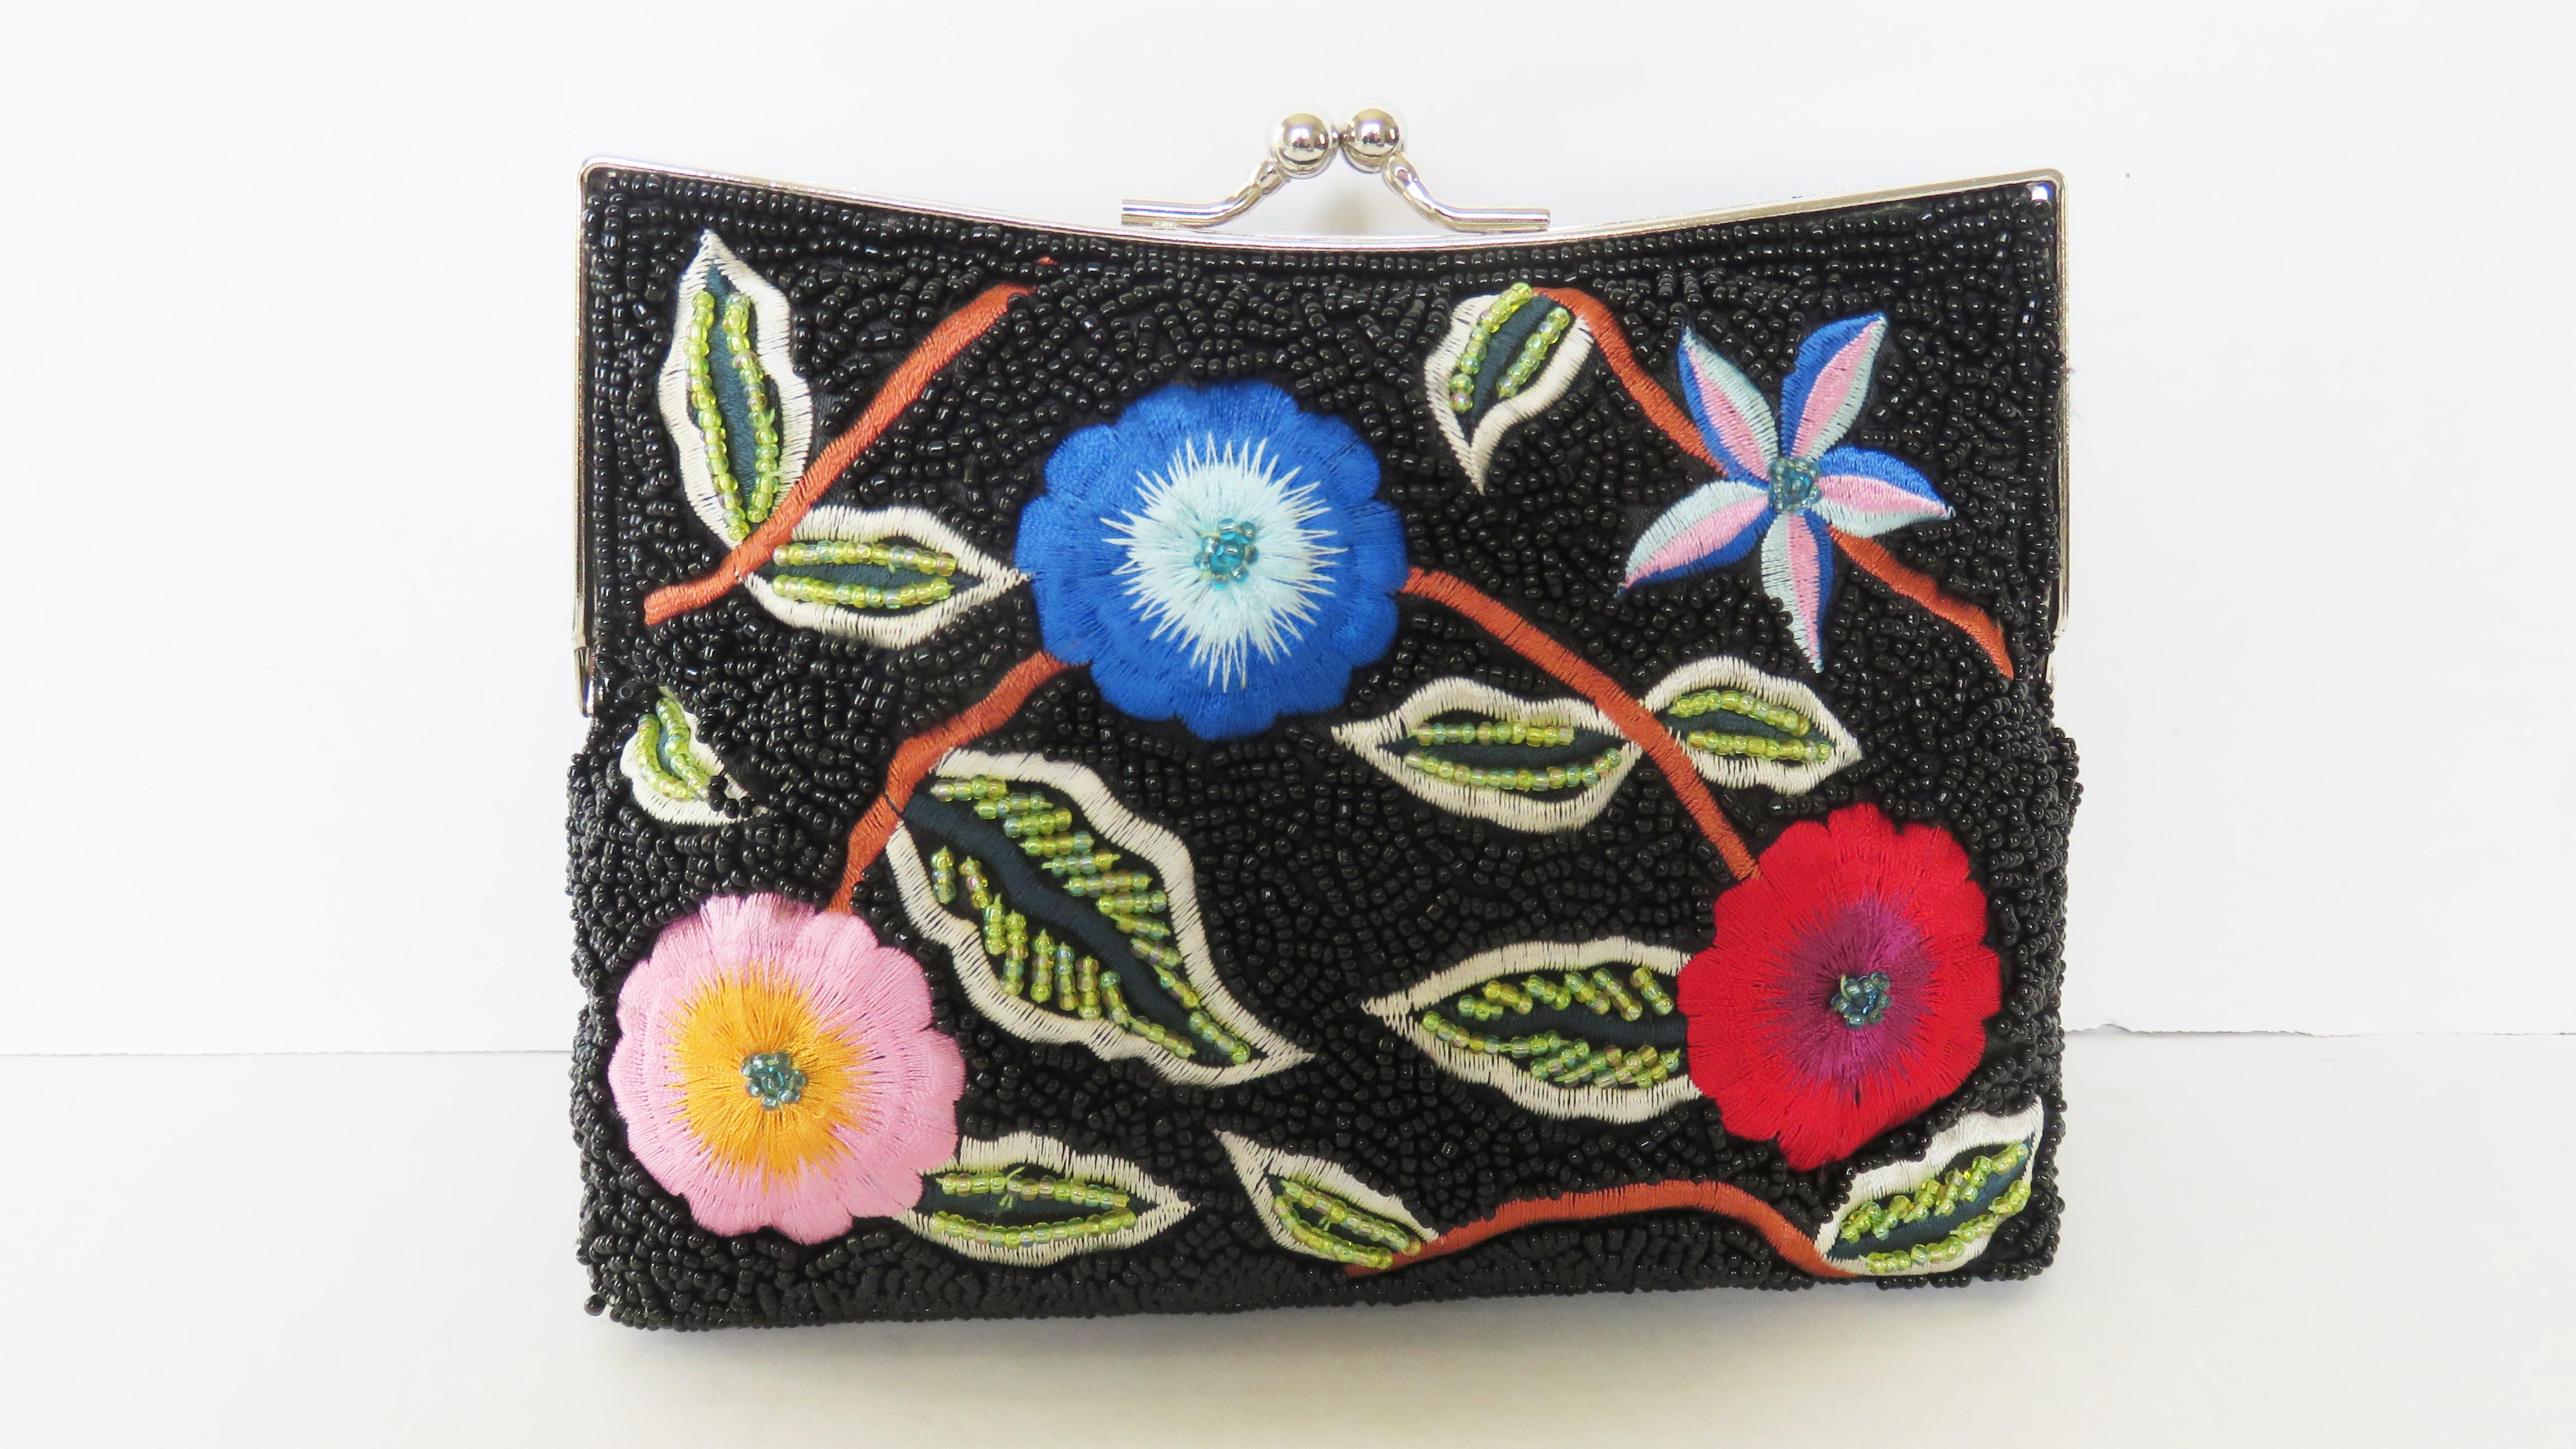 A gorgeous black glass beaded clutch with colorful embroidered flowers on both the front and back.  It has an optional silver chain shoulder strap with tucks into the purse with small hinges so it can be used as a clutch. It has a silver frame with